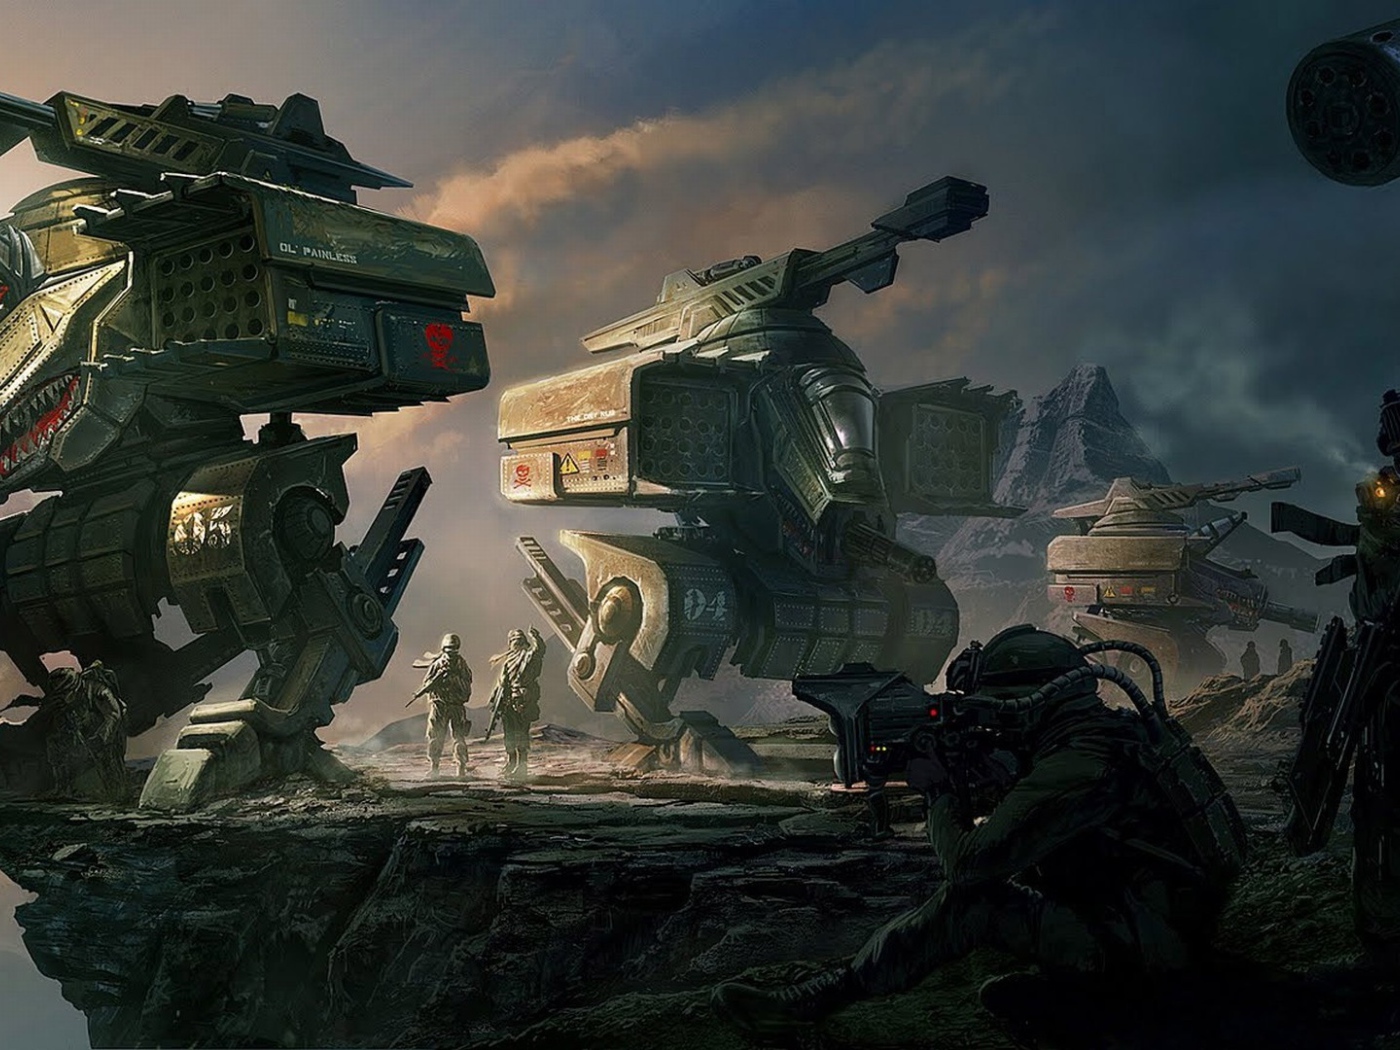 Military Robots - Robot Army Fantasy Art , HD Wallpaper & Backgrounds